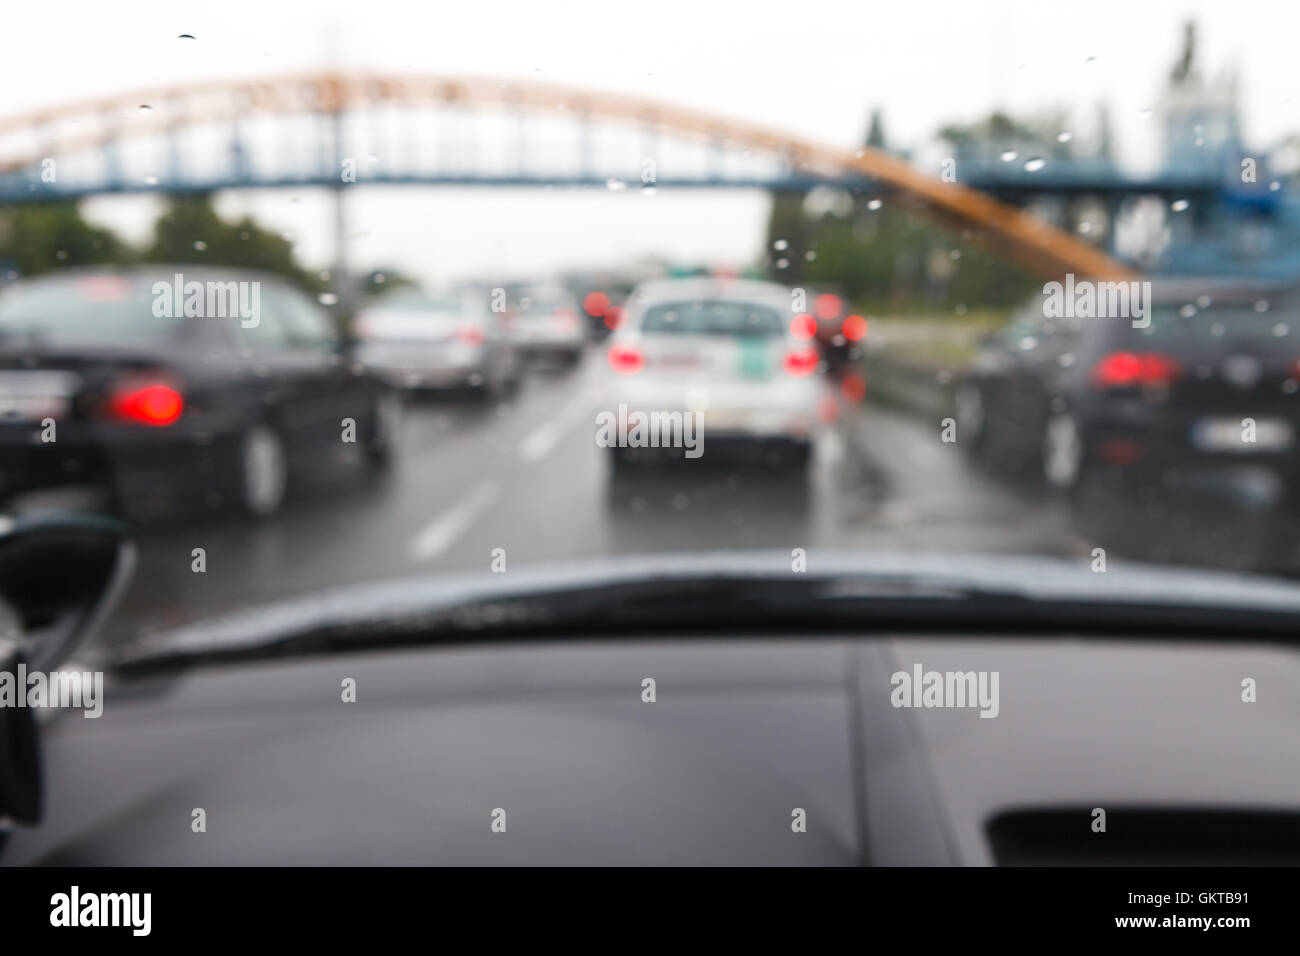 Bad weather conditions driving a car in traffic jam - blurred view Stock Photo